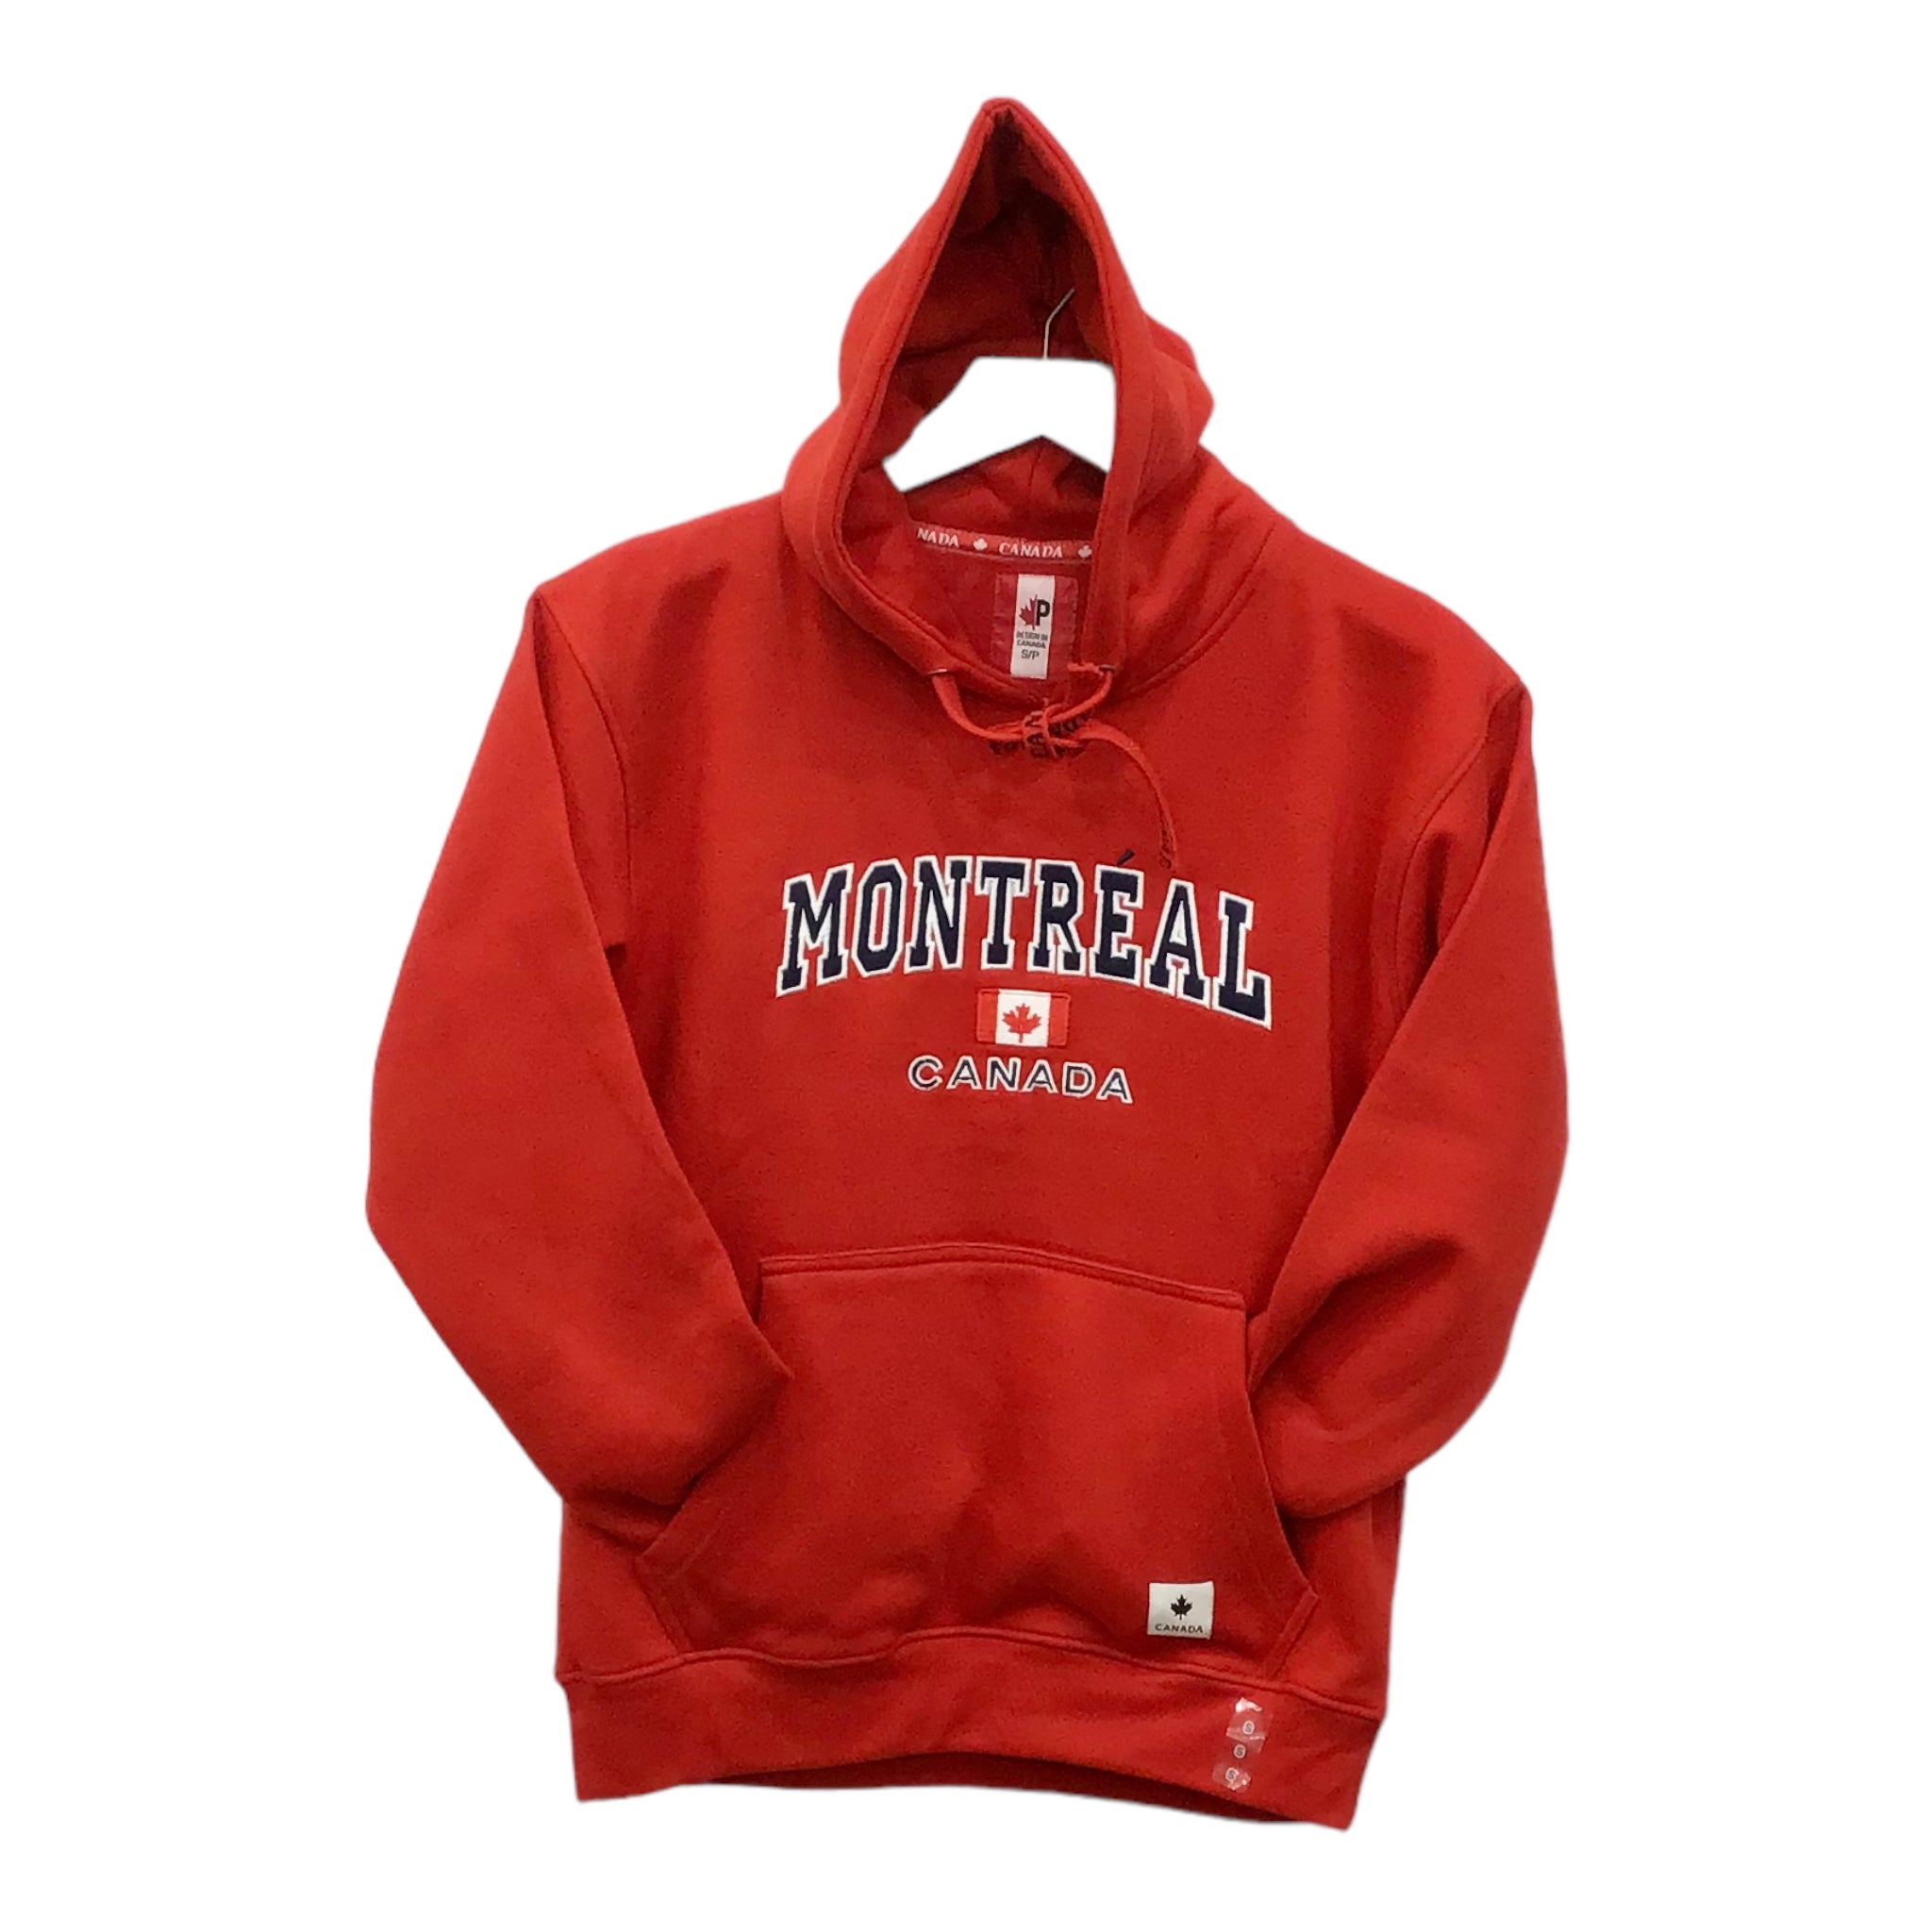 Red Montreal Relax anytime, anywhere in the Half Dome Hoodie from Canada Souvenir Collection Embroidery Men and Women Unisex Sweatshirt